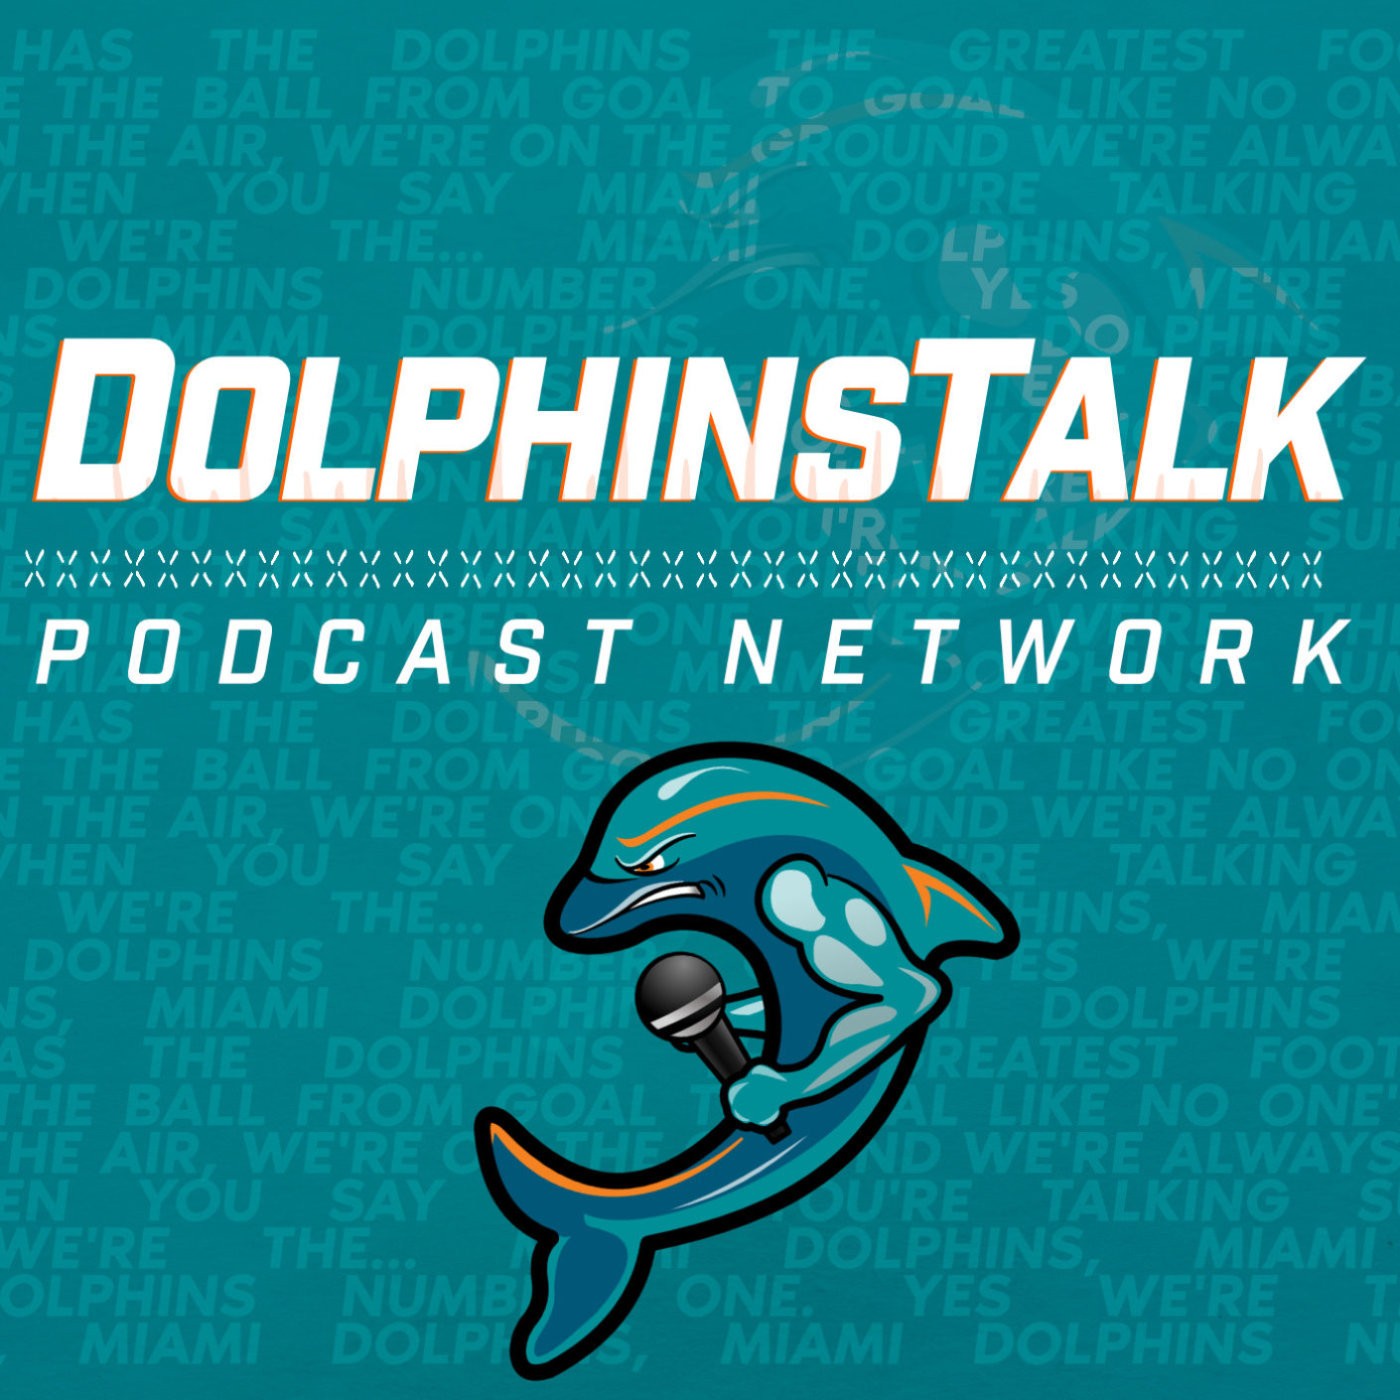 Miami Dolphins Schedule Preview